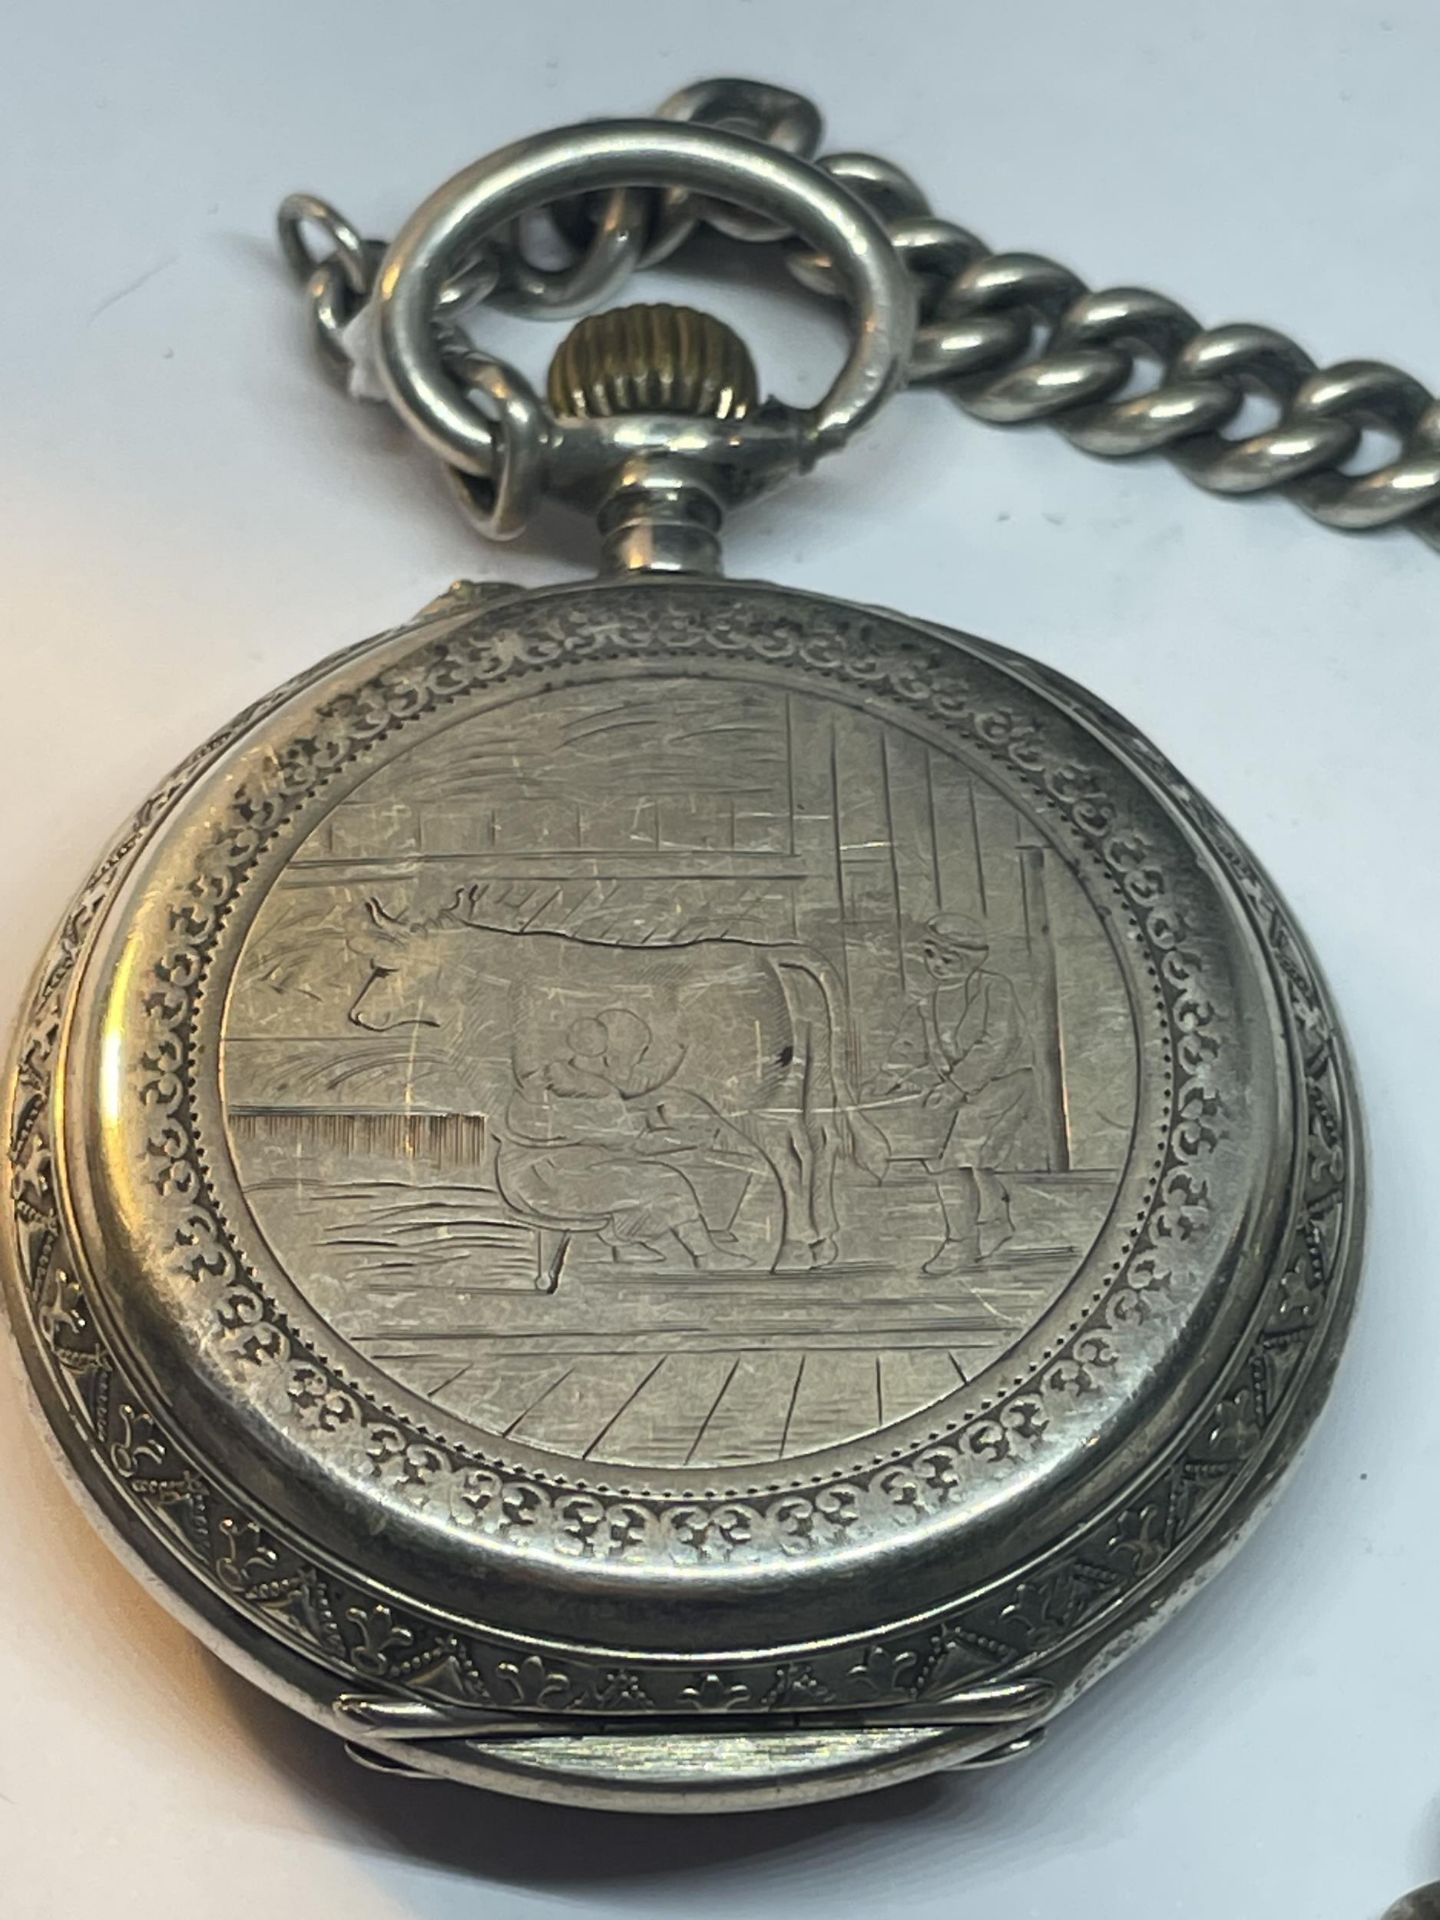 AN ANTIQUE .800 SILVER GOLIATH POCKET WATCH WITH A .830 SILVER CHAIN, SEEN WORKING BUT NO WARRANTIES - Image 3 of 6